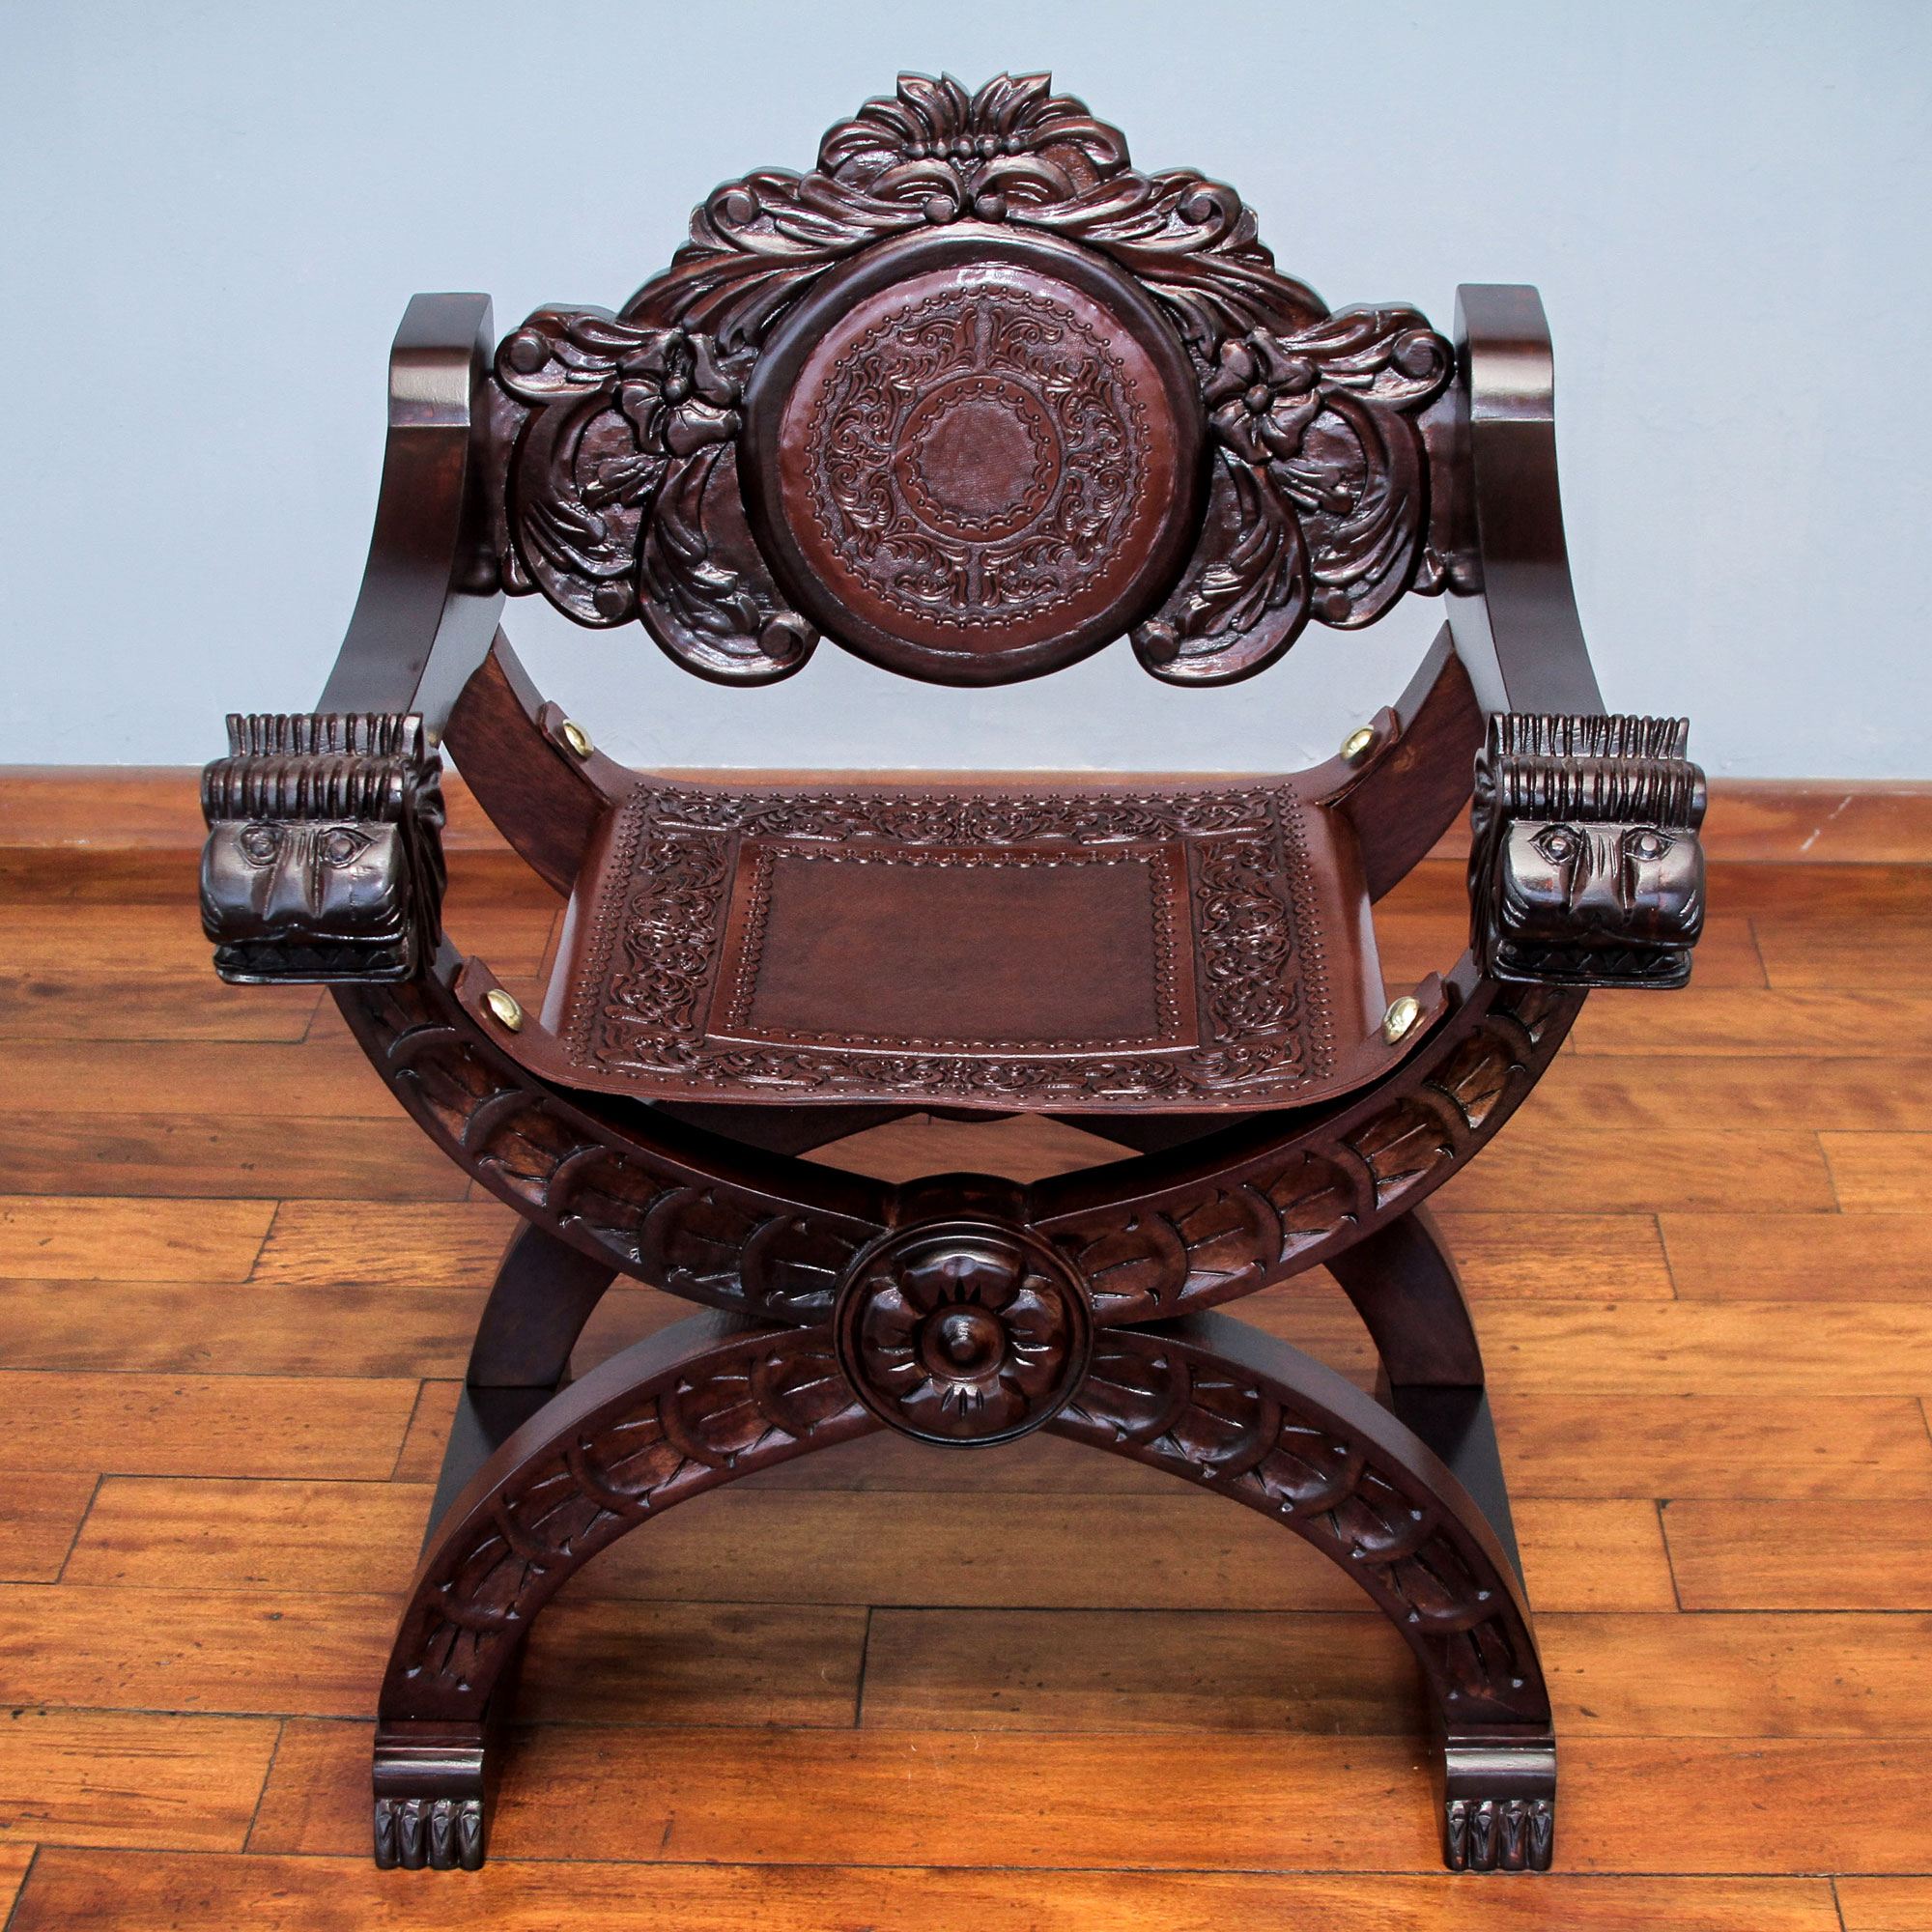 Cedar and leather chair, 'Lion's Head' hand carved wood tooled embossed leather upholstery